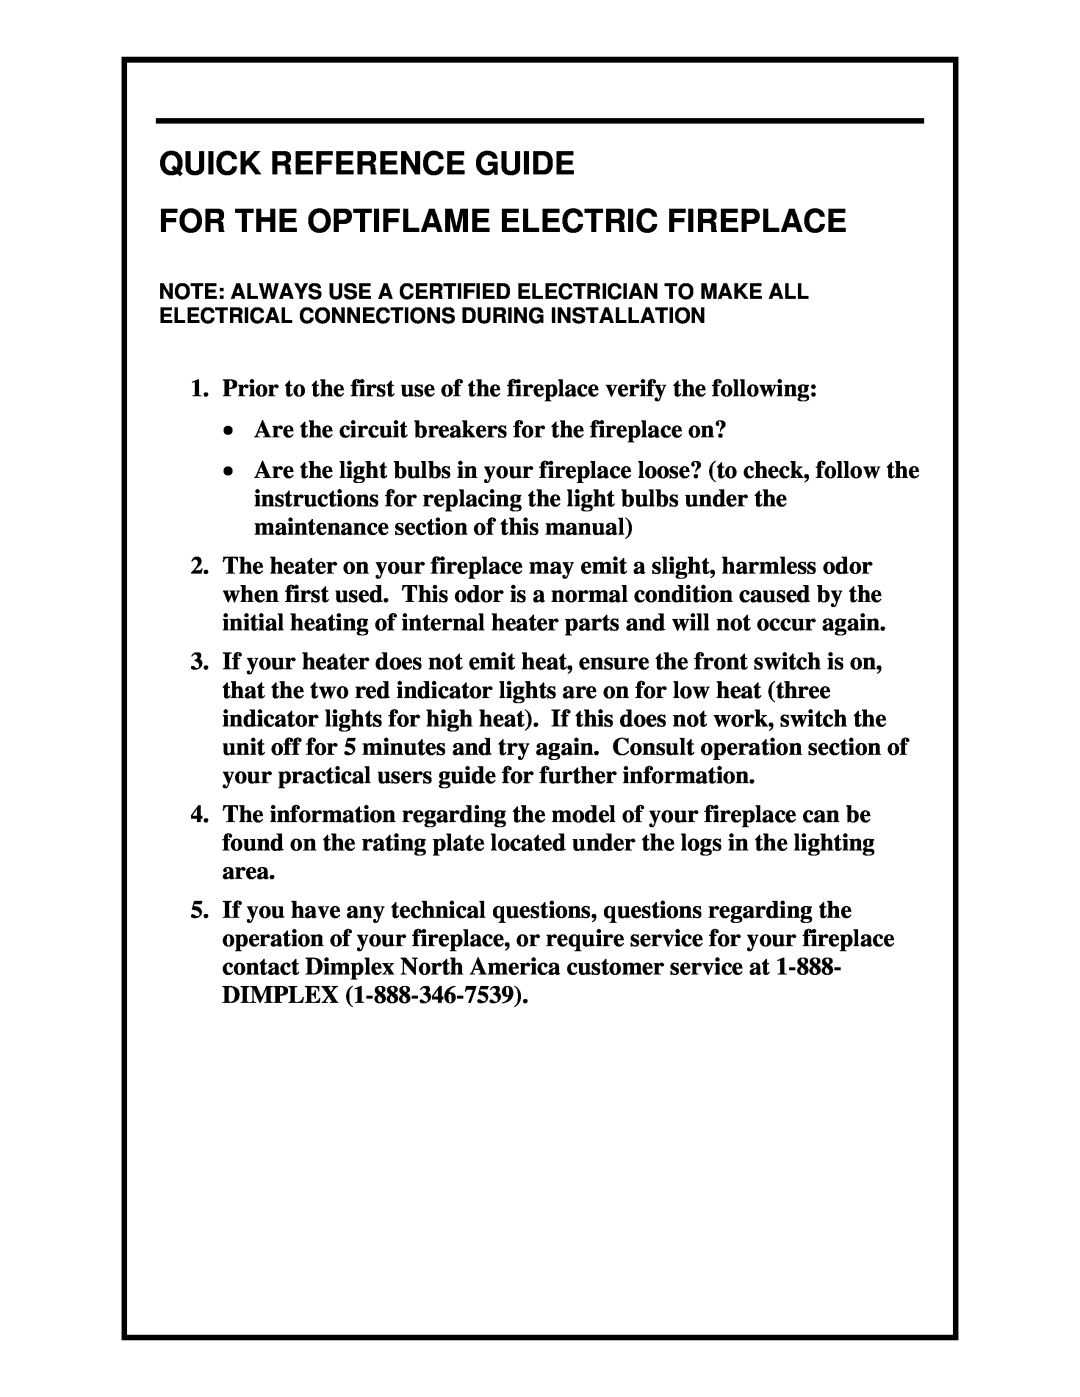 Dimplex manual Quick Reference Guide, For The Optiflame Electric Fireplace 